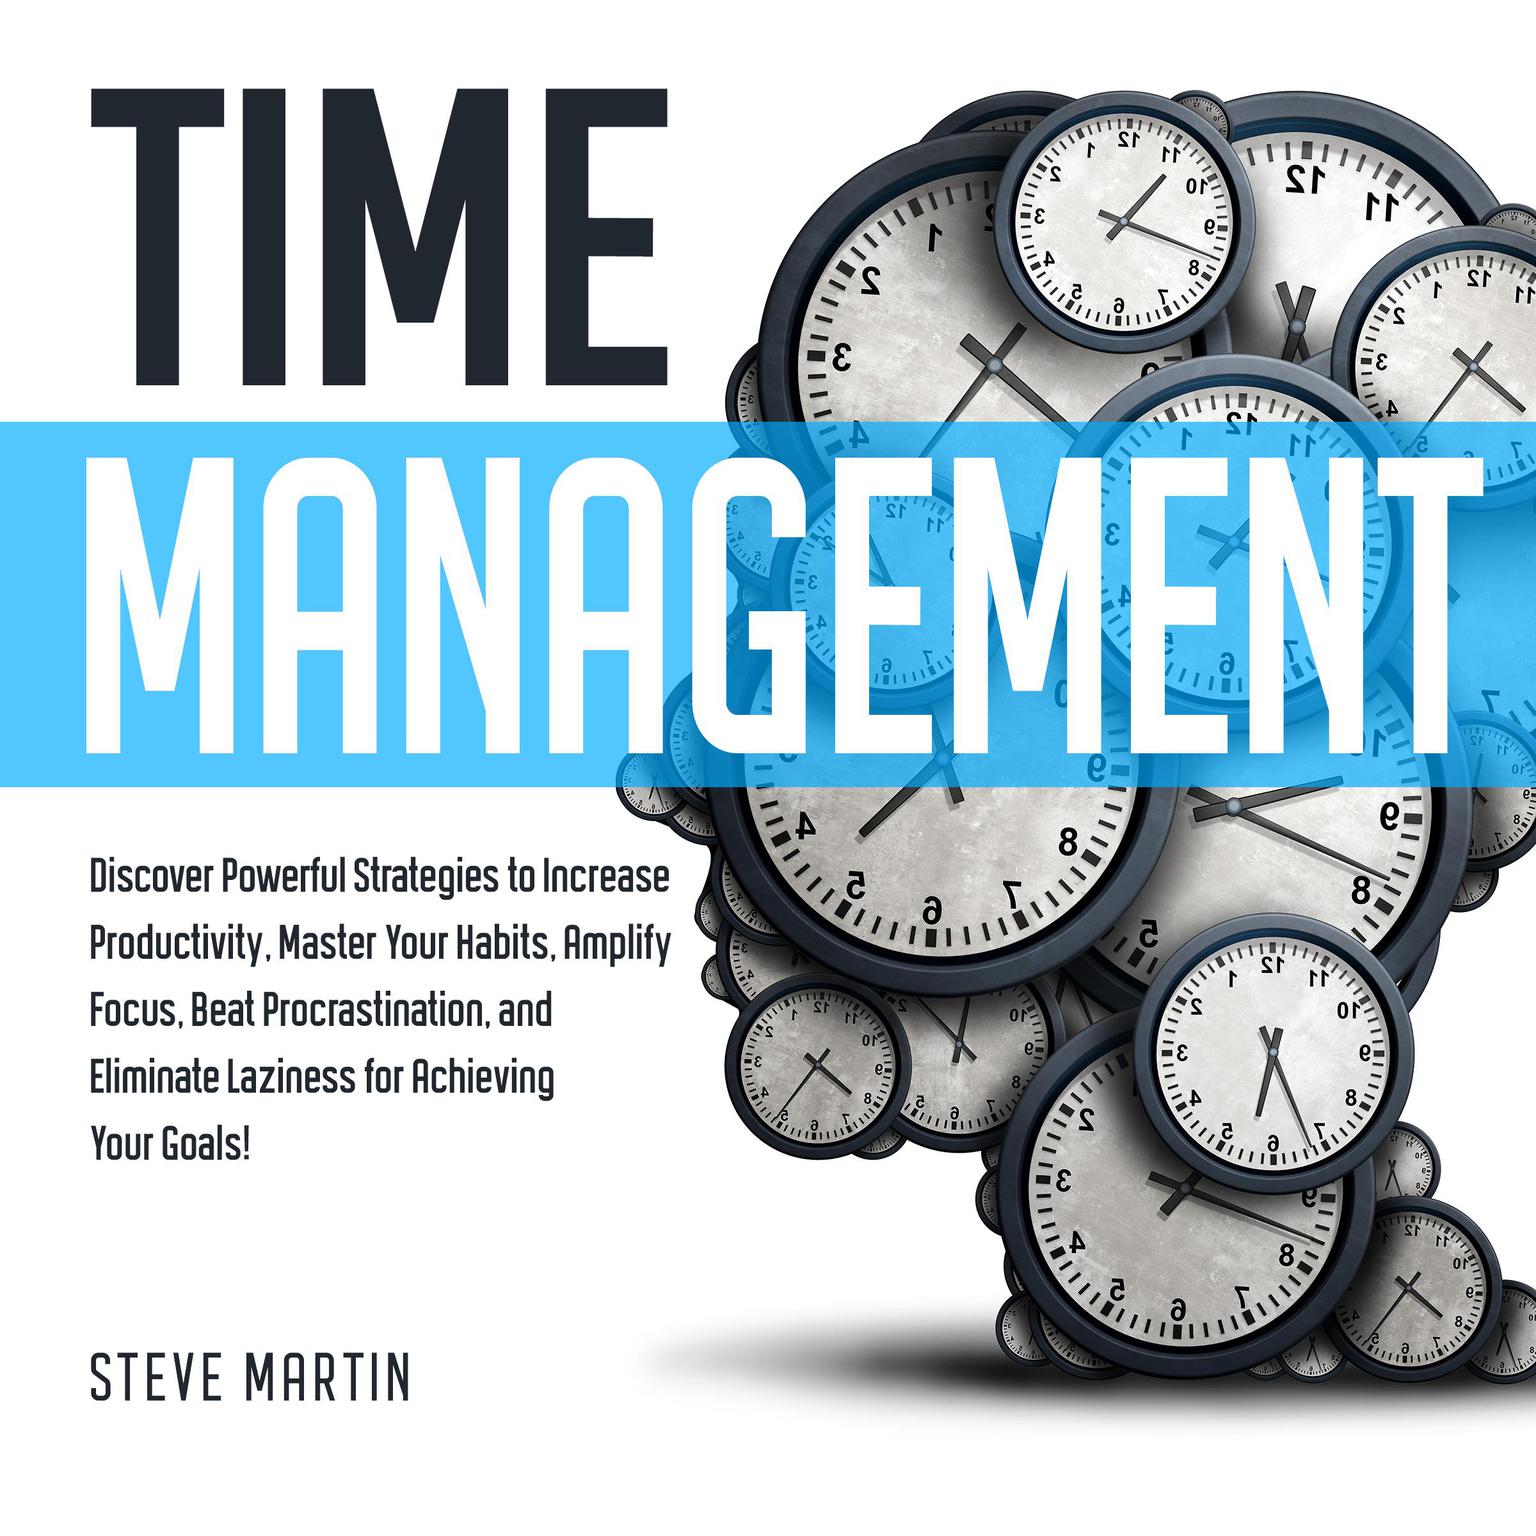 Time Management: Discover Powerful Strategies to Increase Productivity, Master Your Habits, Amplify Focus, Beat Procrastination, and Eliminate Laziness for Achieving Your Goals!: Discover Powerful Strategies to Increase Productivity, Master Your Habits, Amplify Focus, Beat Procrastination, and Eliminate Laziness for Achieving Your Goals! Audiobook, by Steve Martin